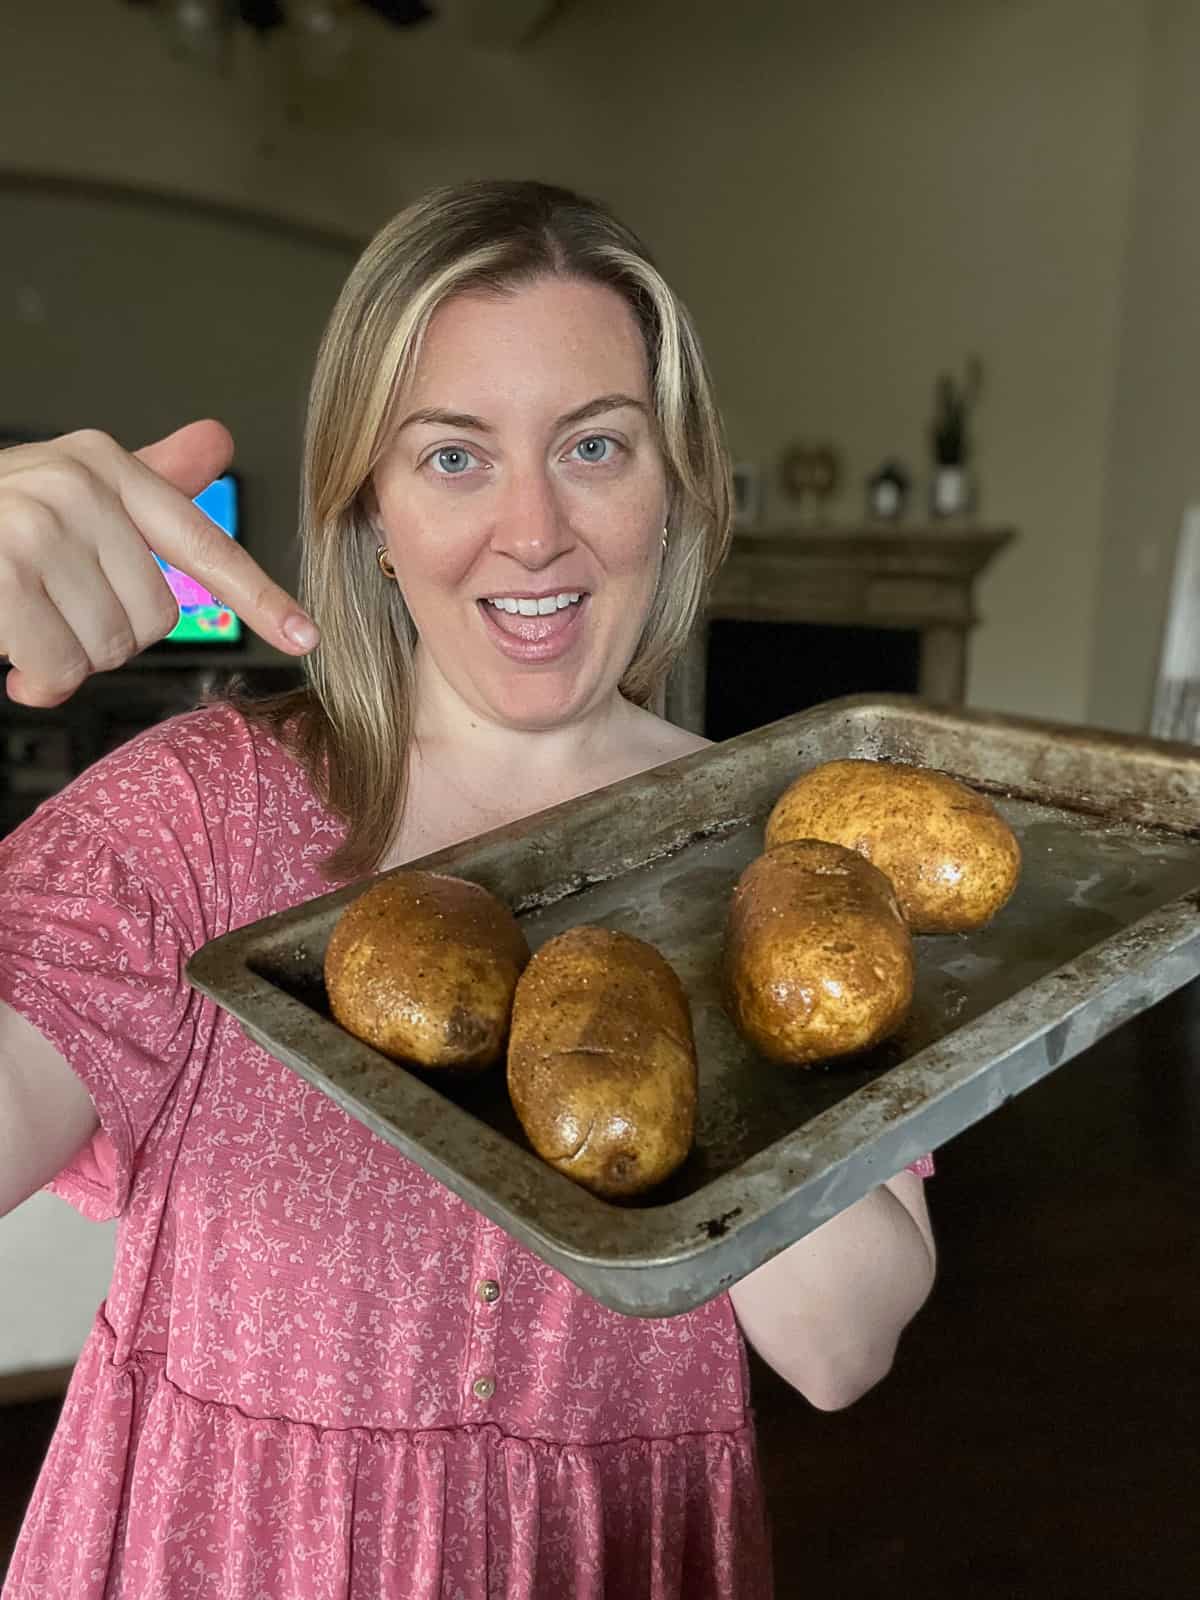 Food blogger holding russet baked potatoes seasoned for smoking on the Traeger pellet grill